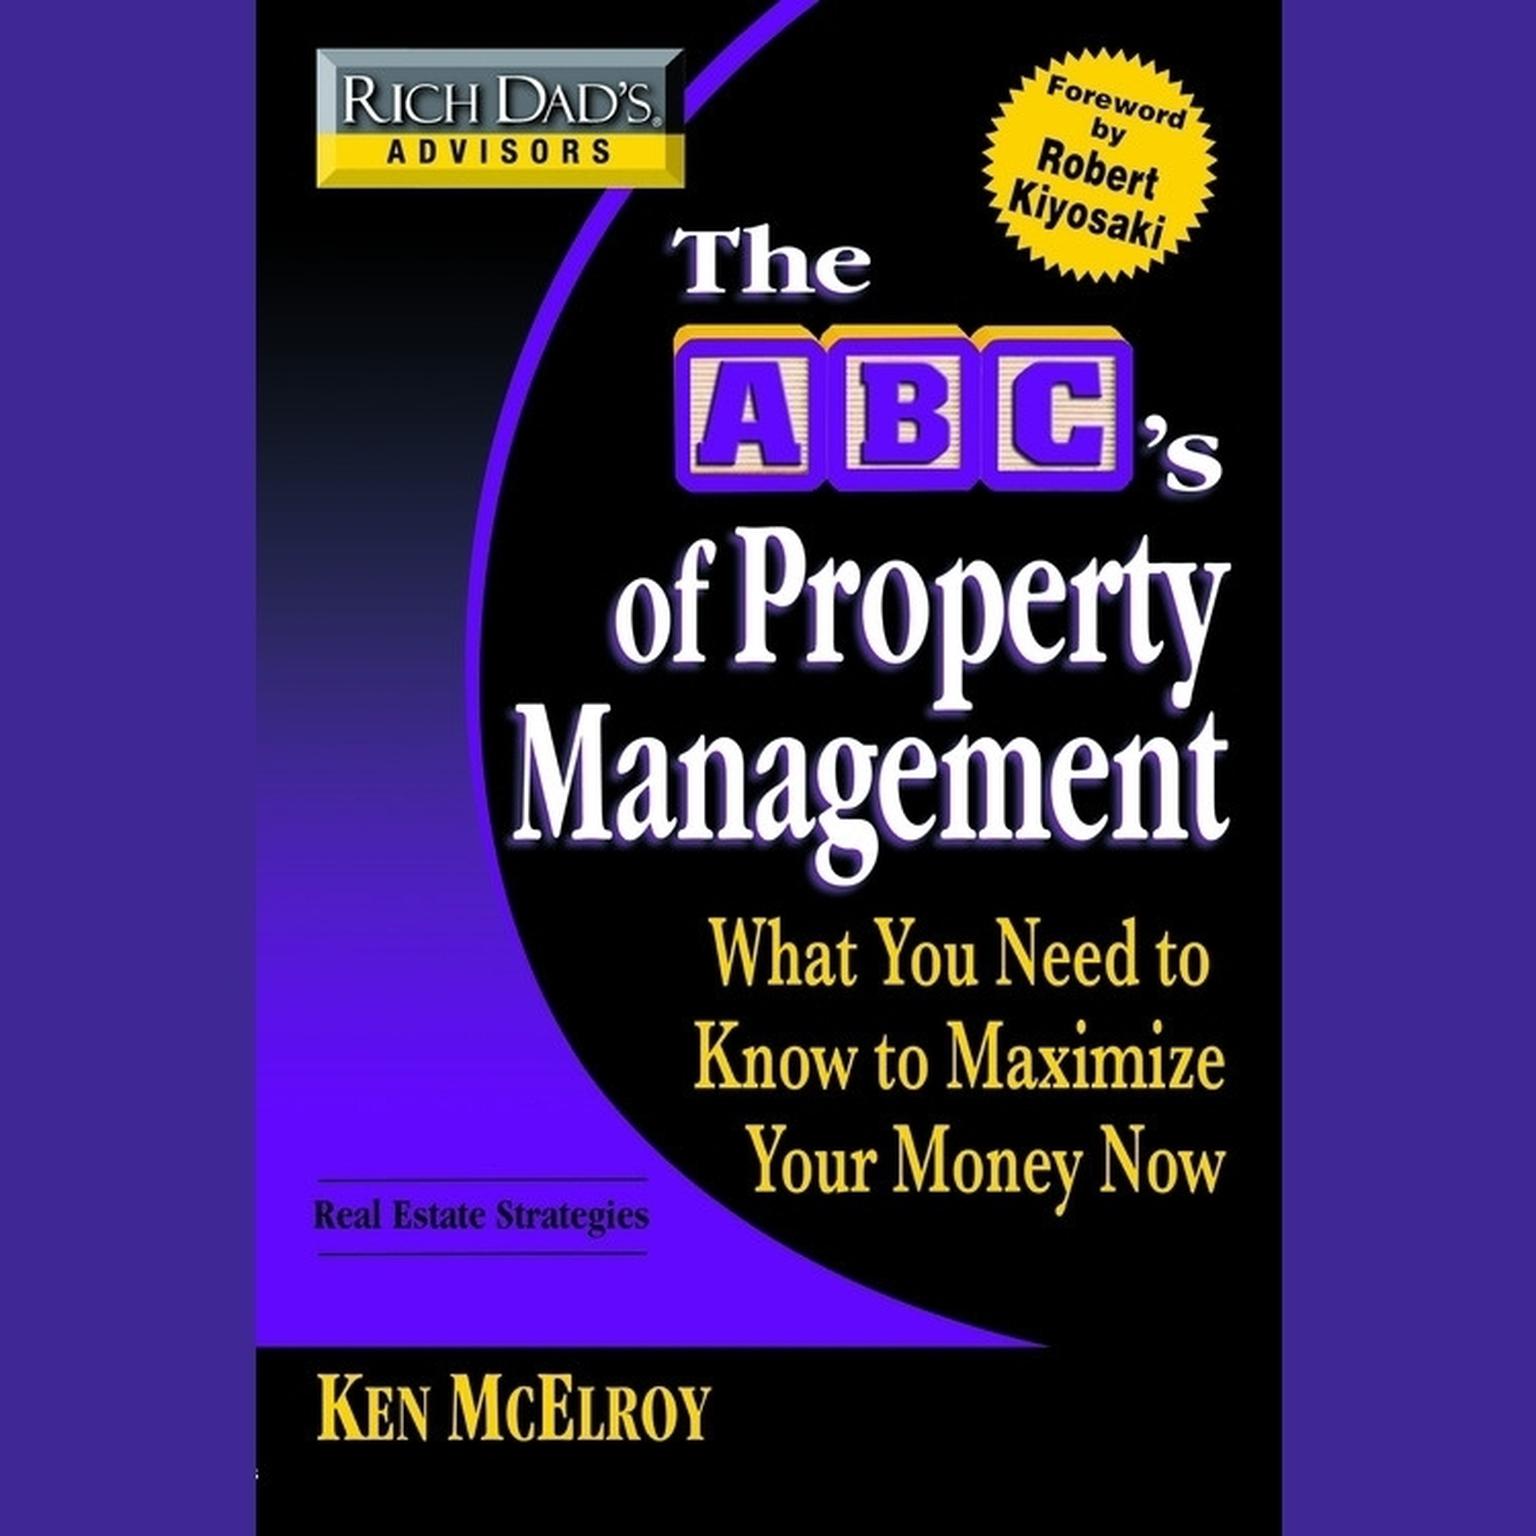 Rich Dads Advisors: The ABCs of Property Management (Abridged): What You Need to Know to Maximize Your Money Now Audiobook, by Ken McElroy